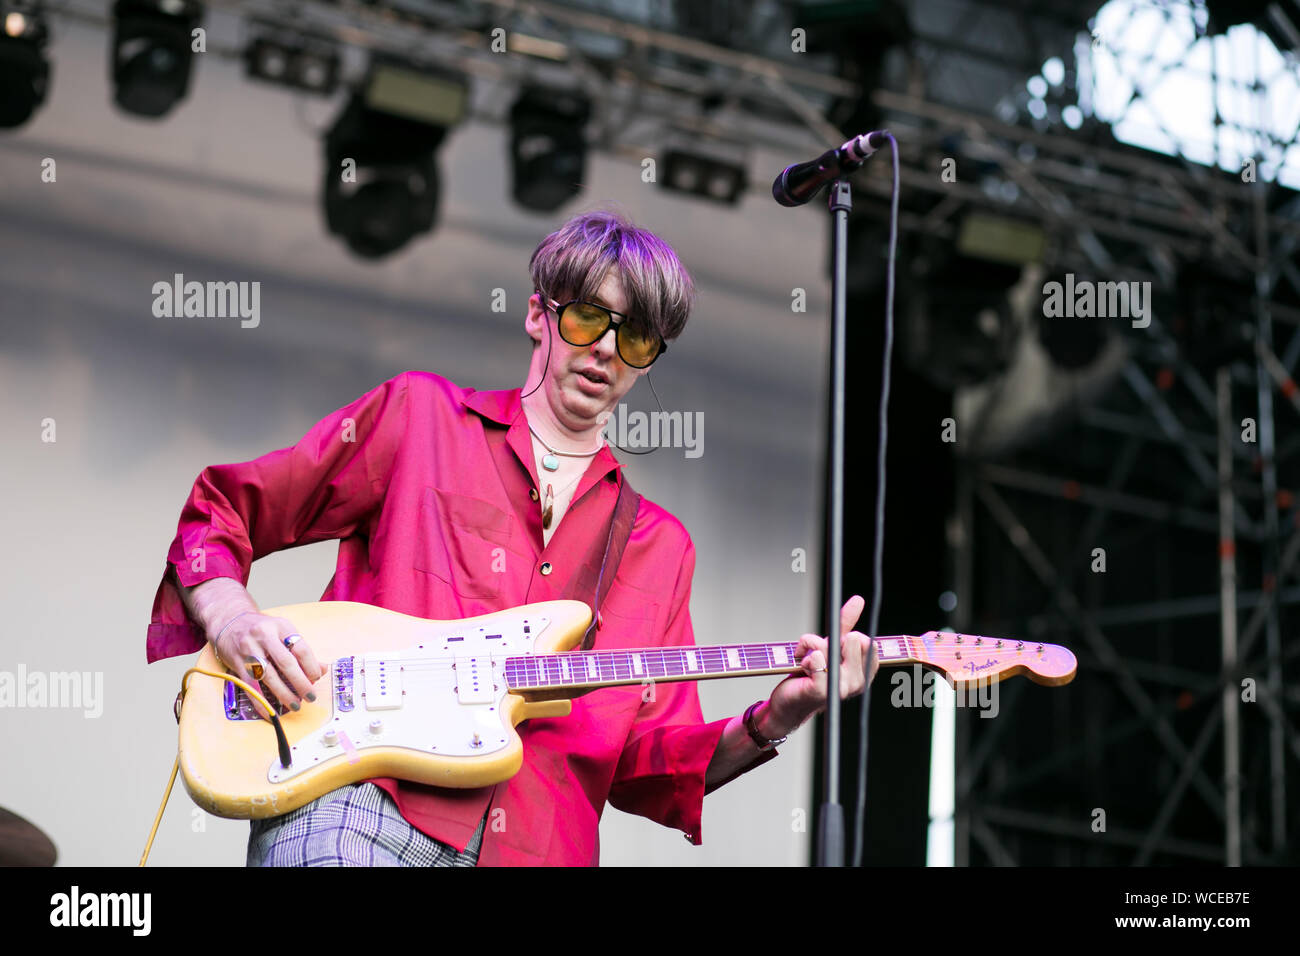 Turin, Italy August 23 2019 the indie rock band Deerhunter perform live Stock Photo